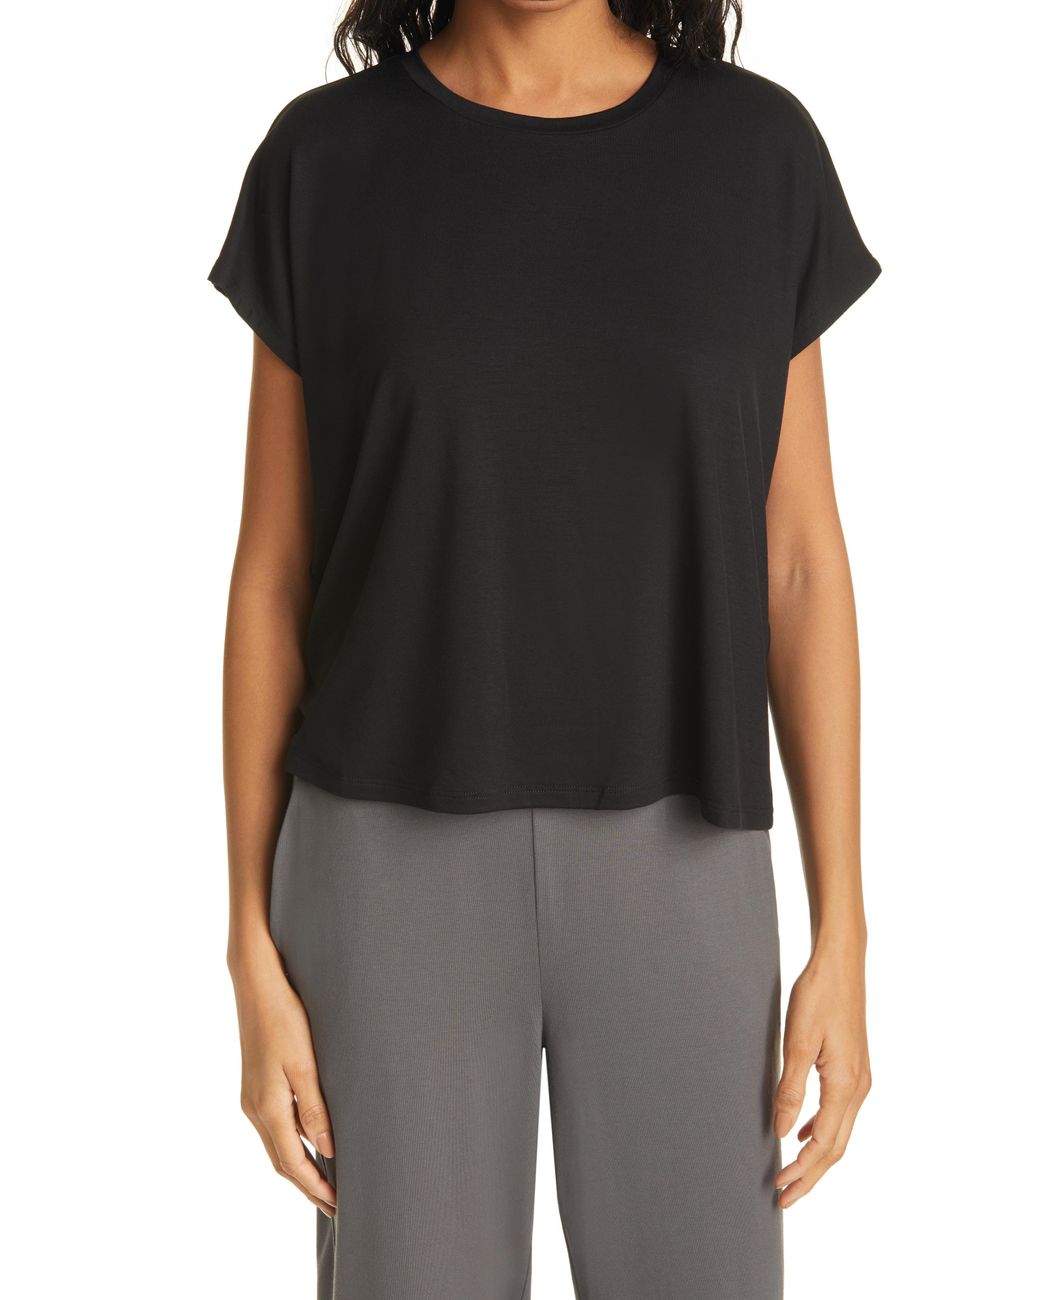 Eileen Fisher Crewneck Boxy Top in Black - Lyst